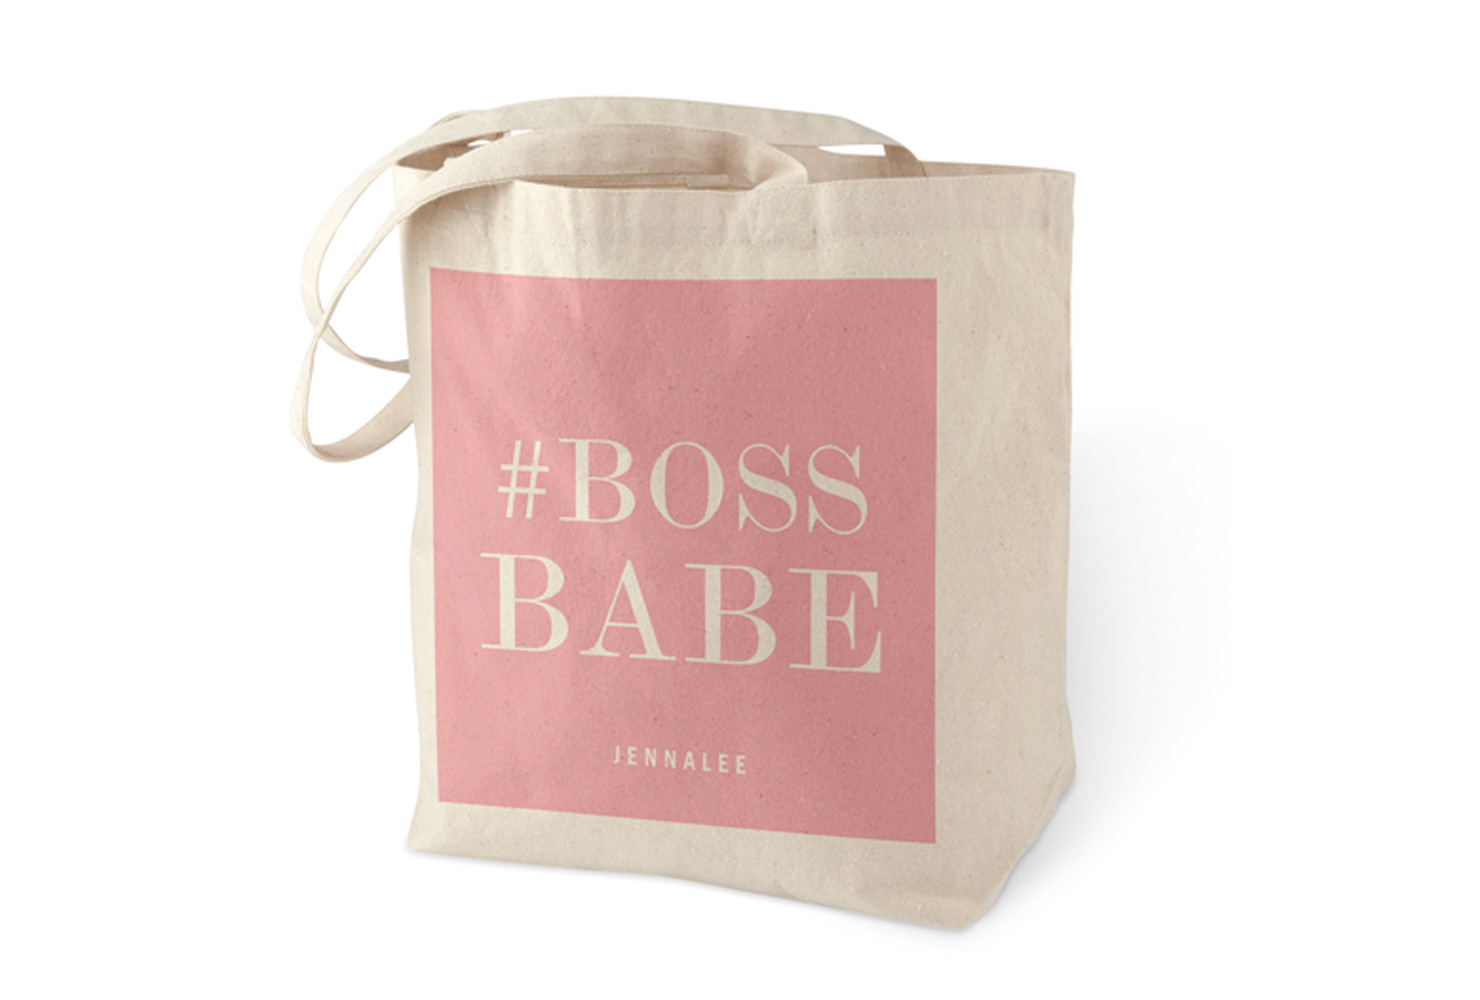 Boss babe canvas tote.